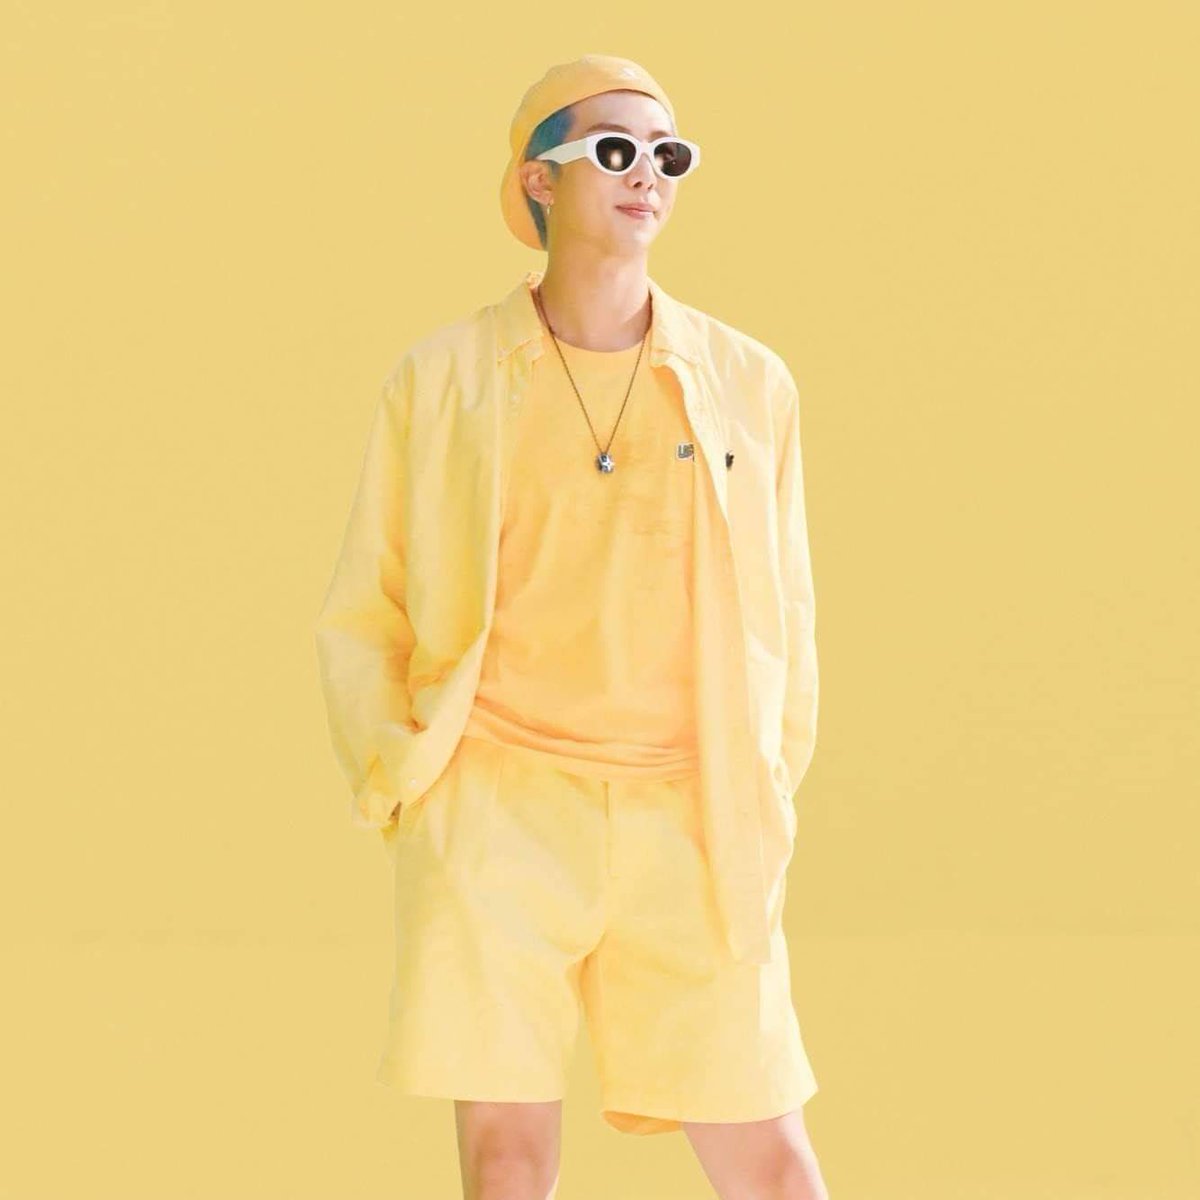 I am obsessed with joon in yellow idc idc  @BTS_twt  #BTS    #BTS_Butter    #BTSARMY  